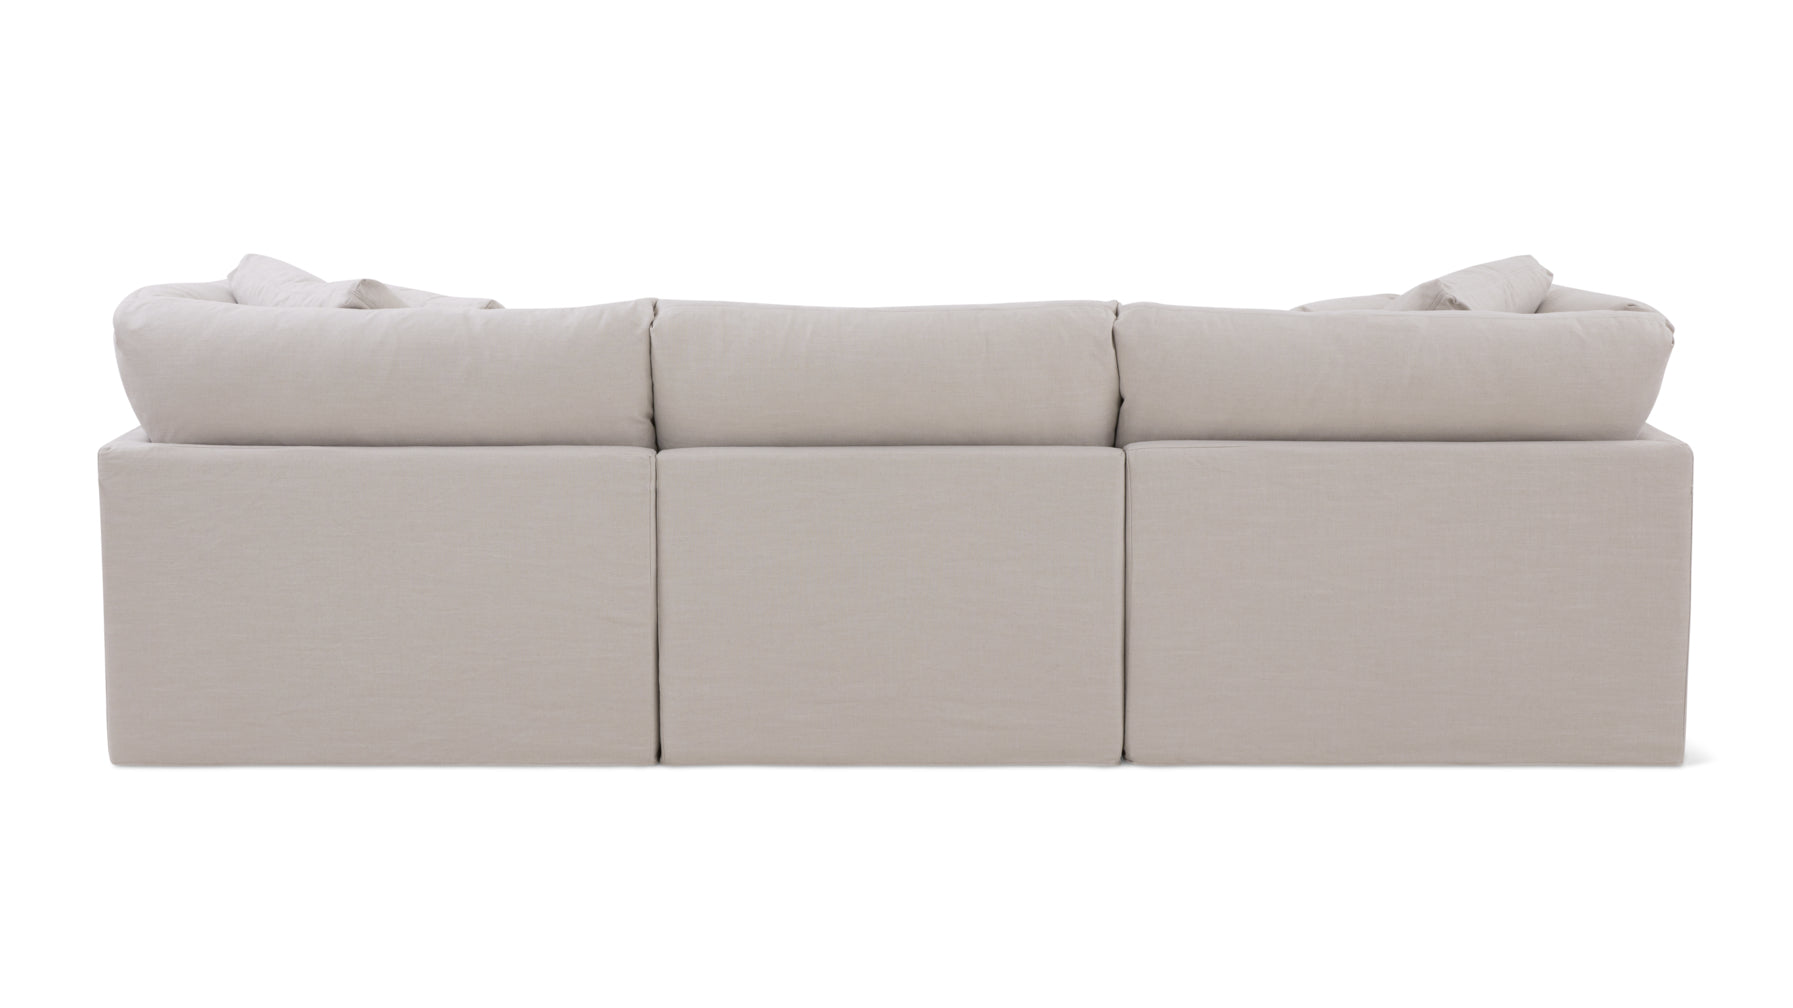 Get Together™ 4-Piece Modular Sectional, Standard, Clay - Image 7